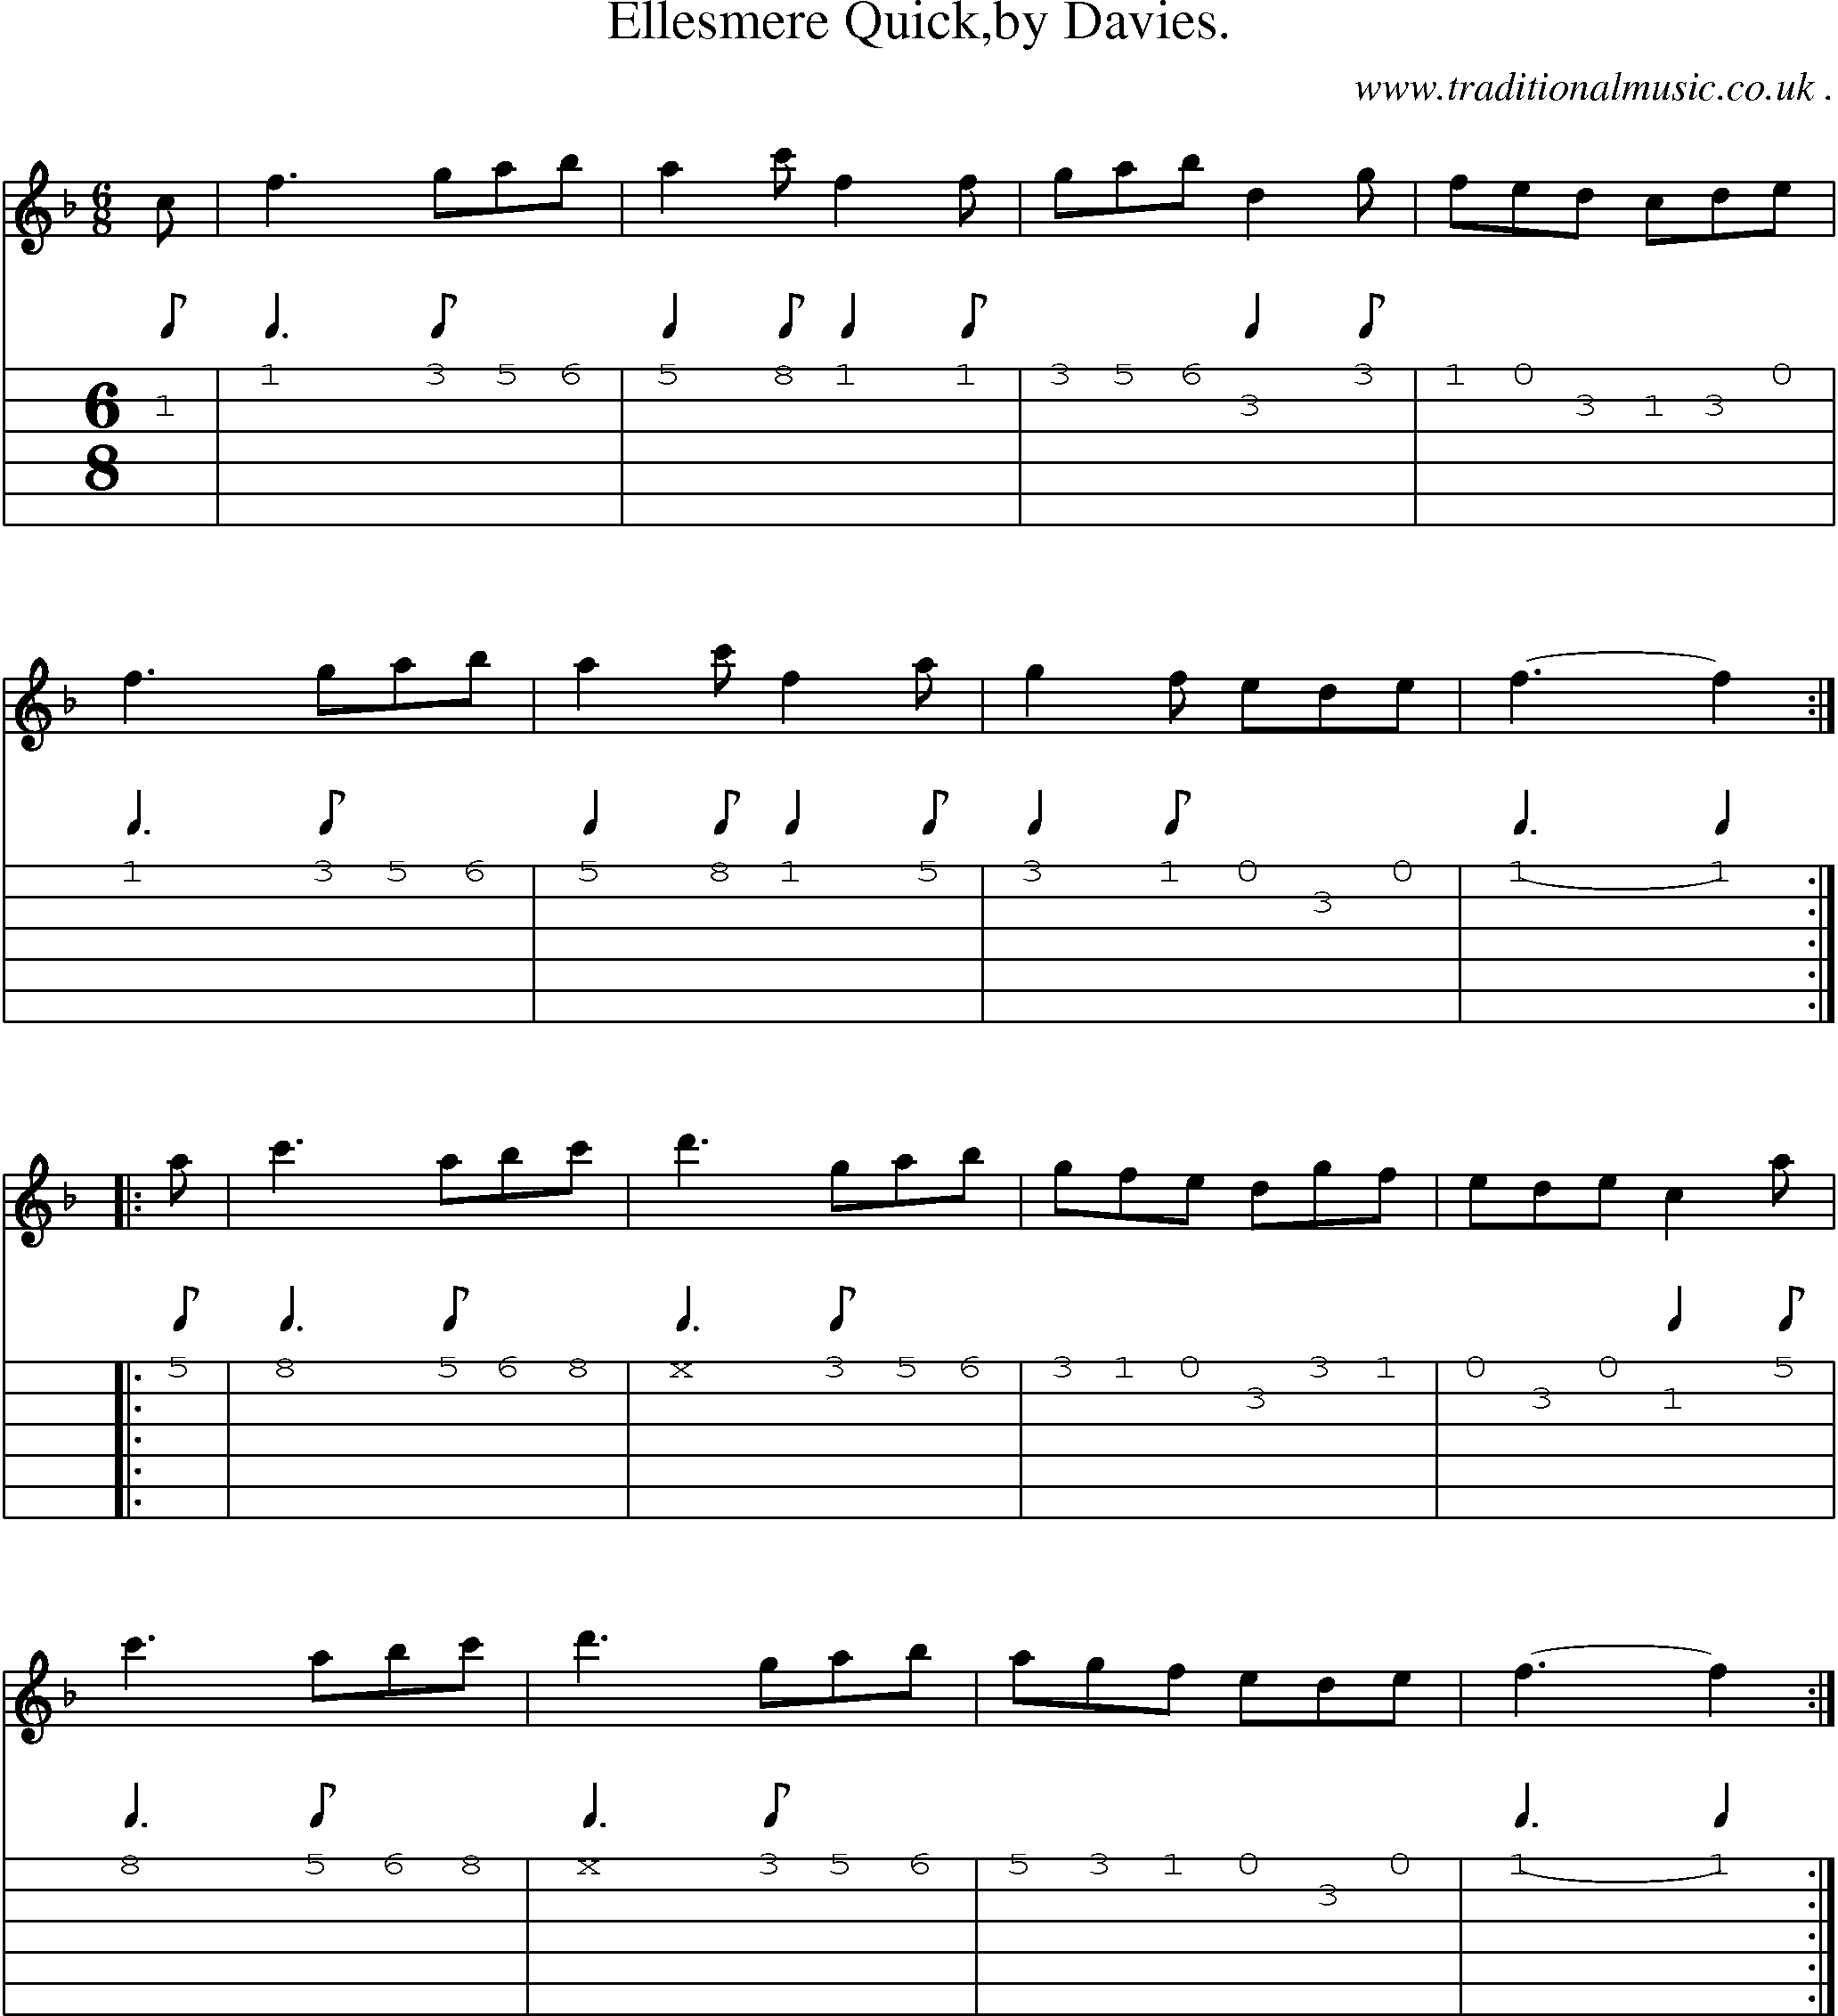 Sheet-Music and Guitar Tabs for Ellesmere Quickby Davies